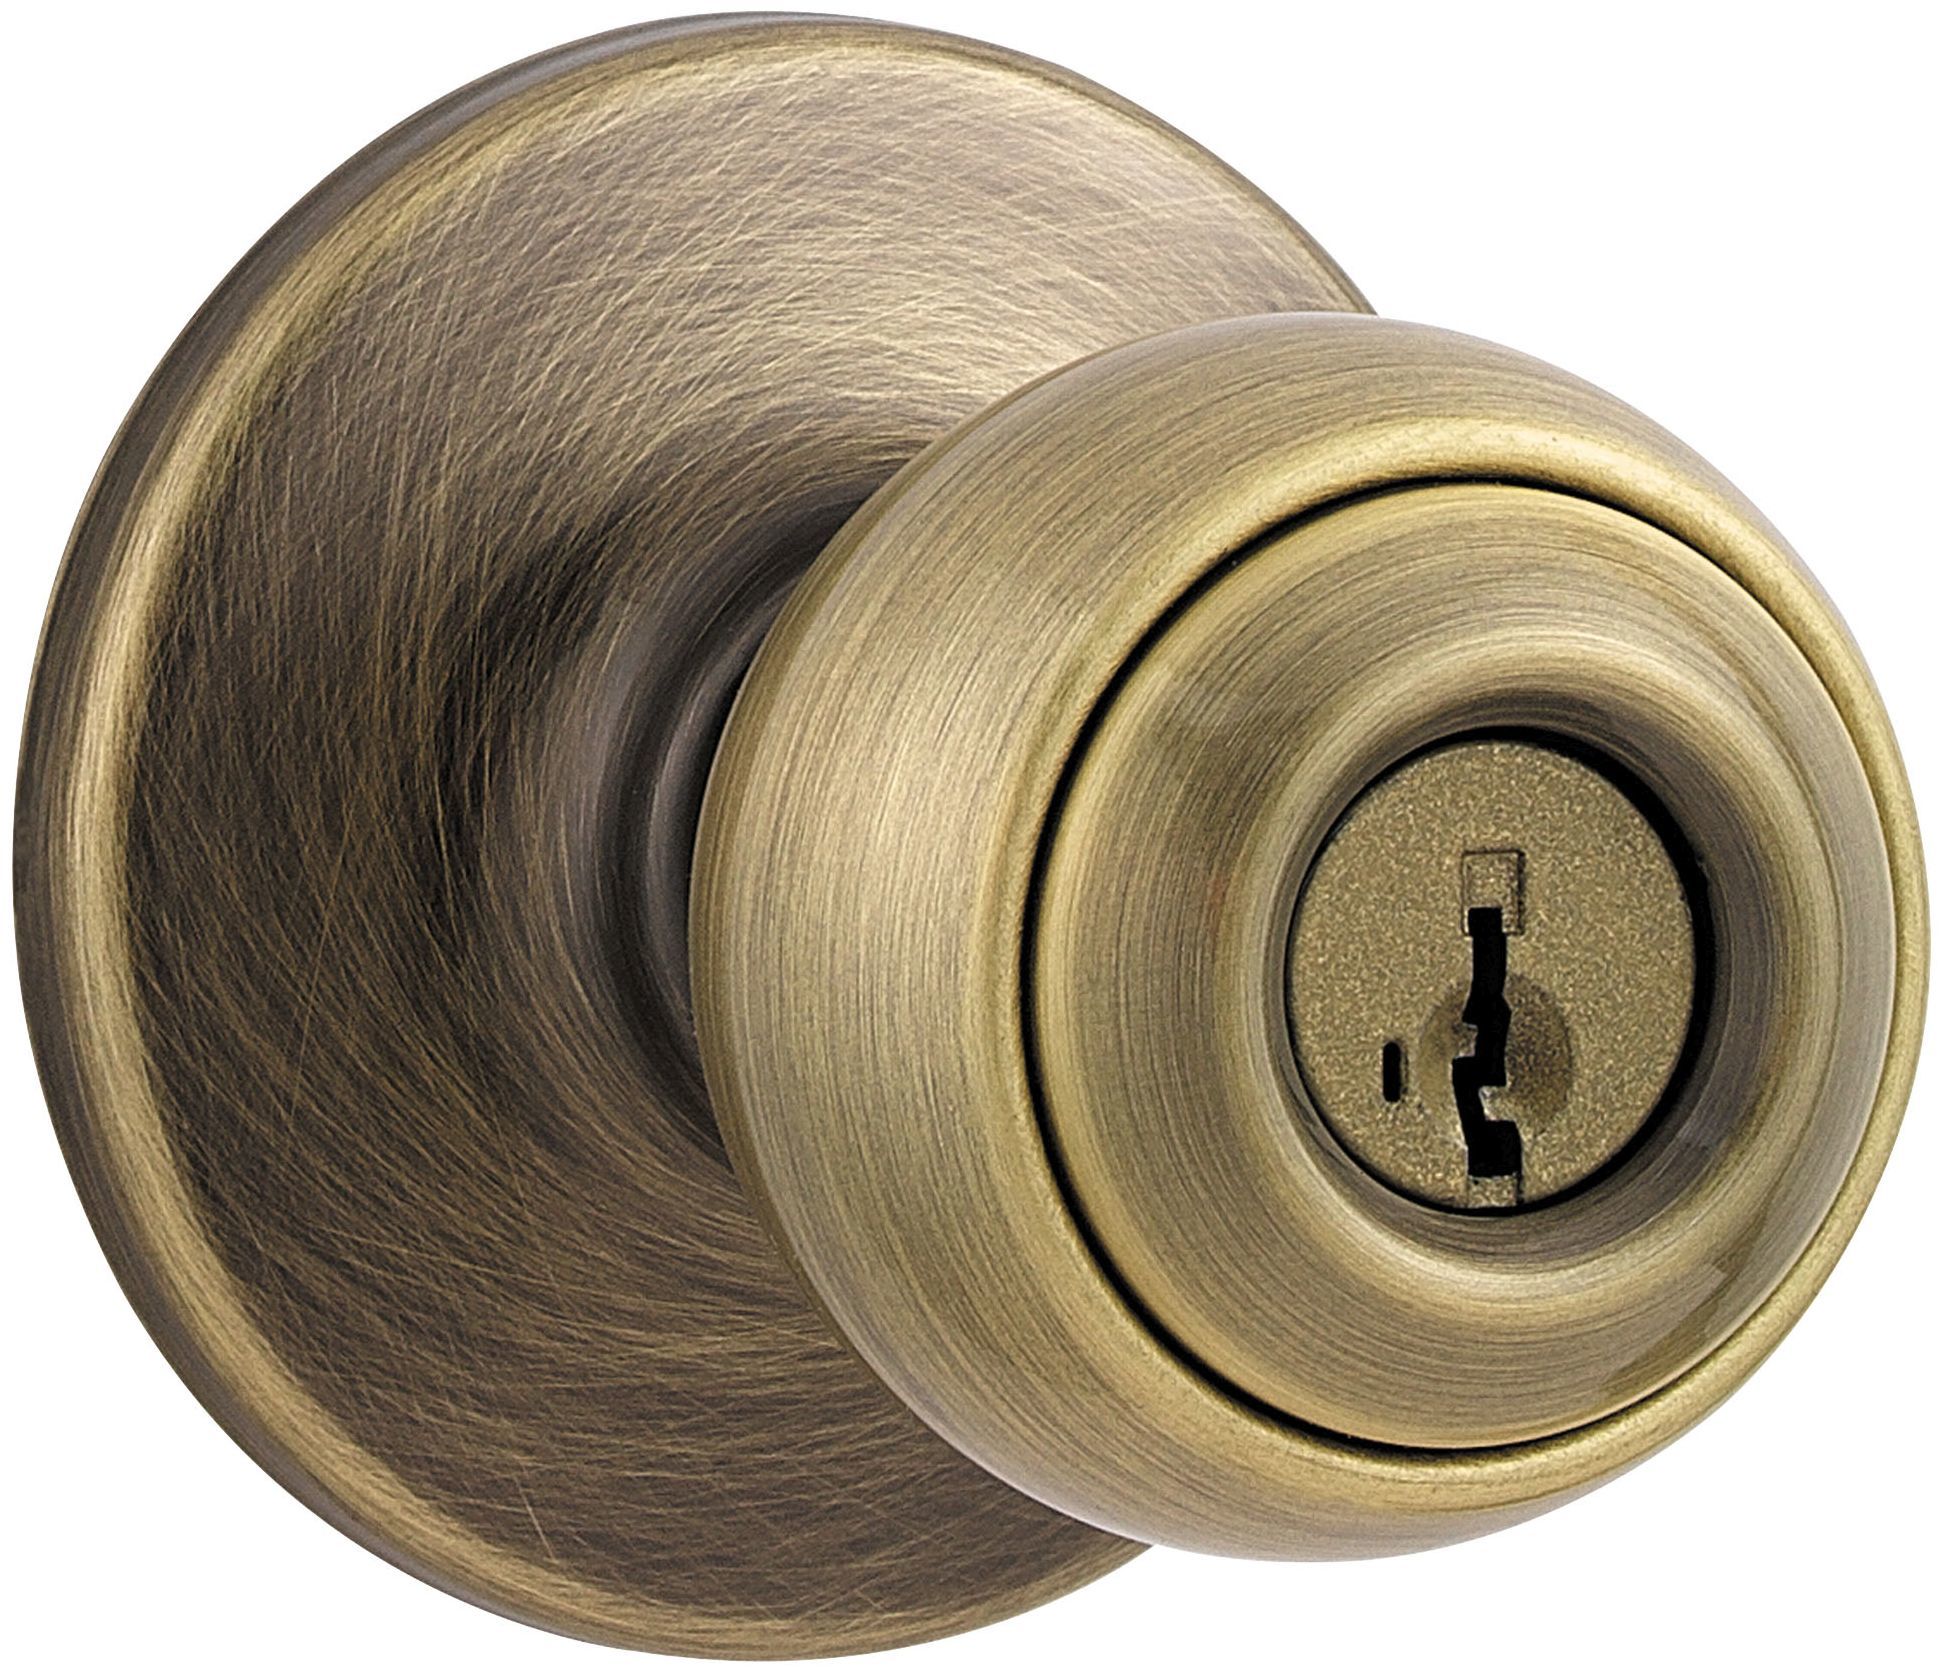 Kwikset 400P-5SV1 Antique Brass Polo Keyed Entry Door Knobset with SmartKey 